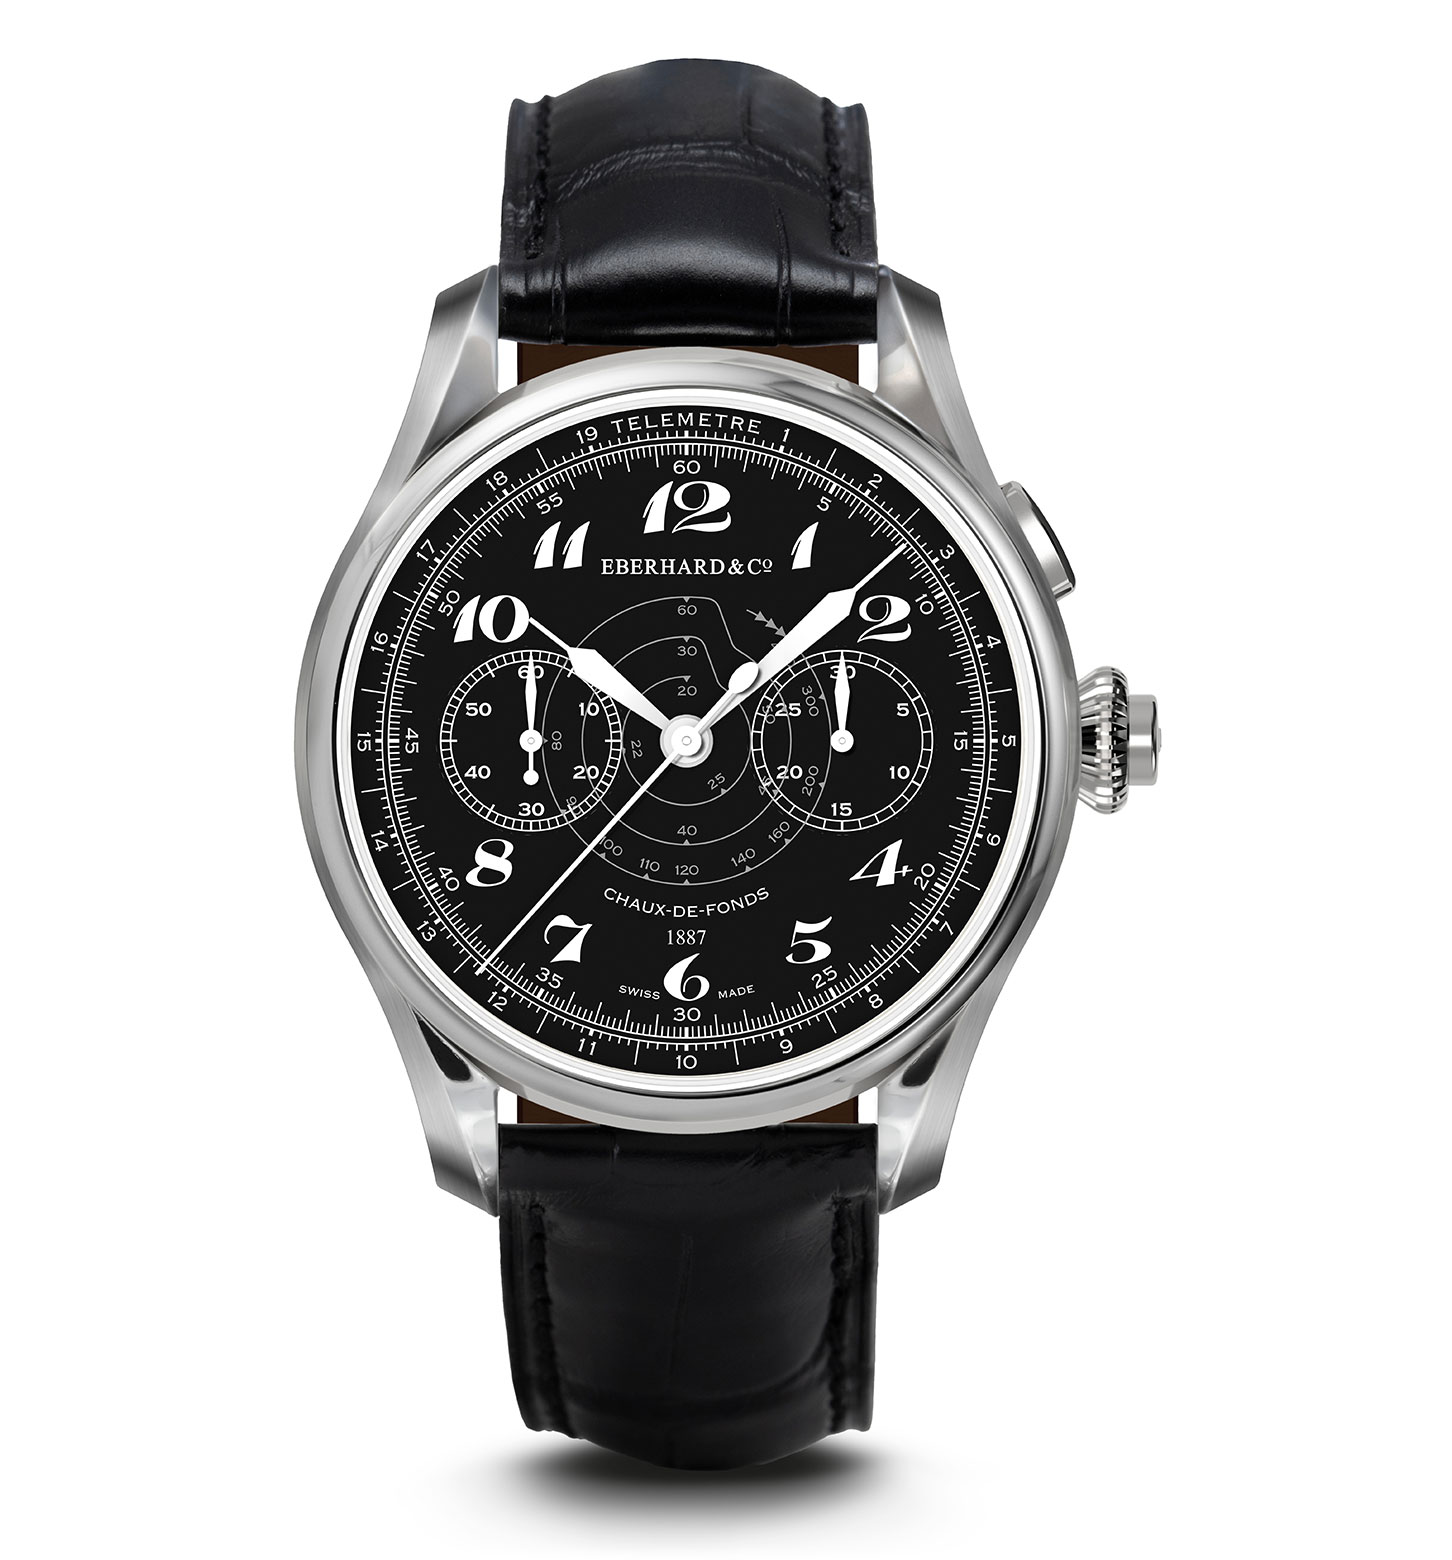 Eberhard Chronograph 1887 Automatique with black dial